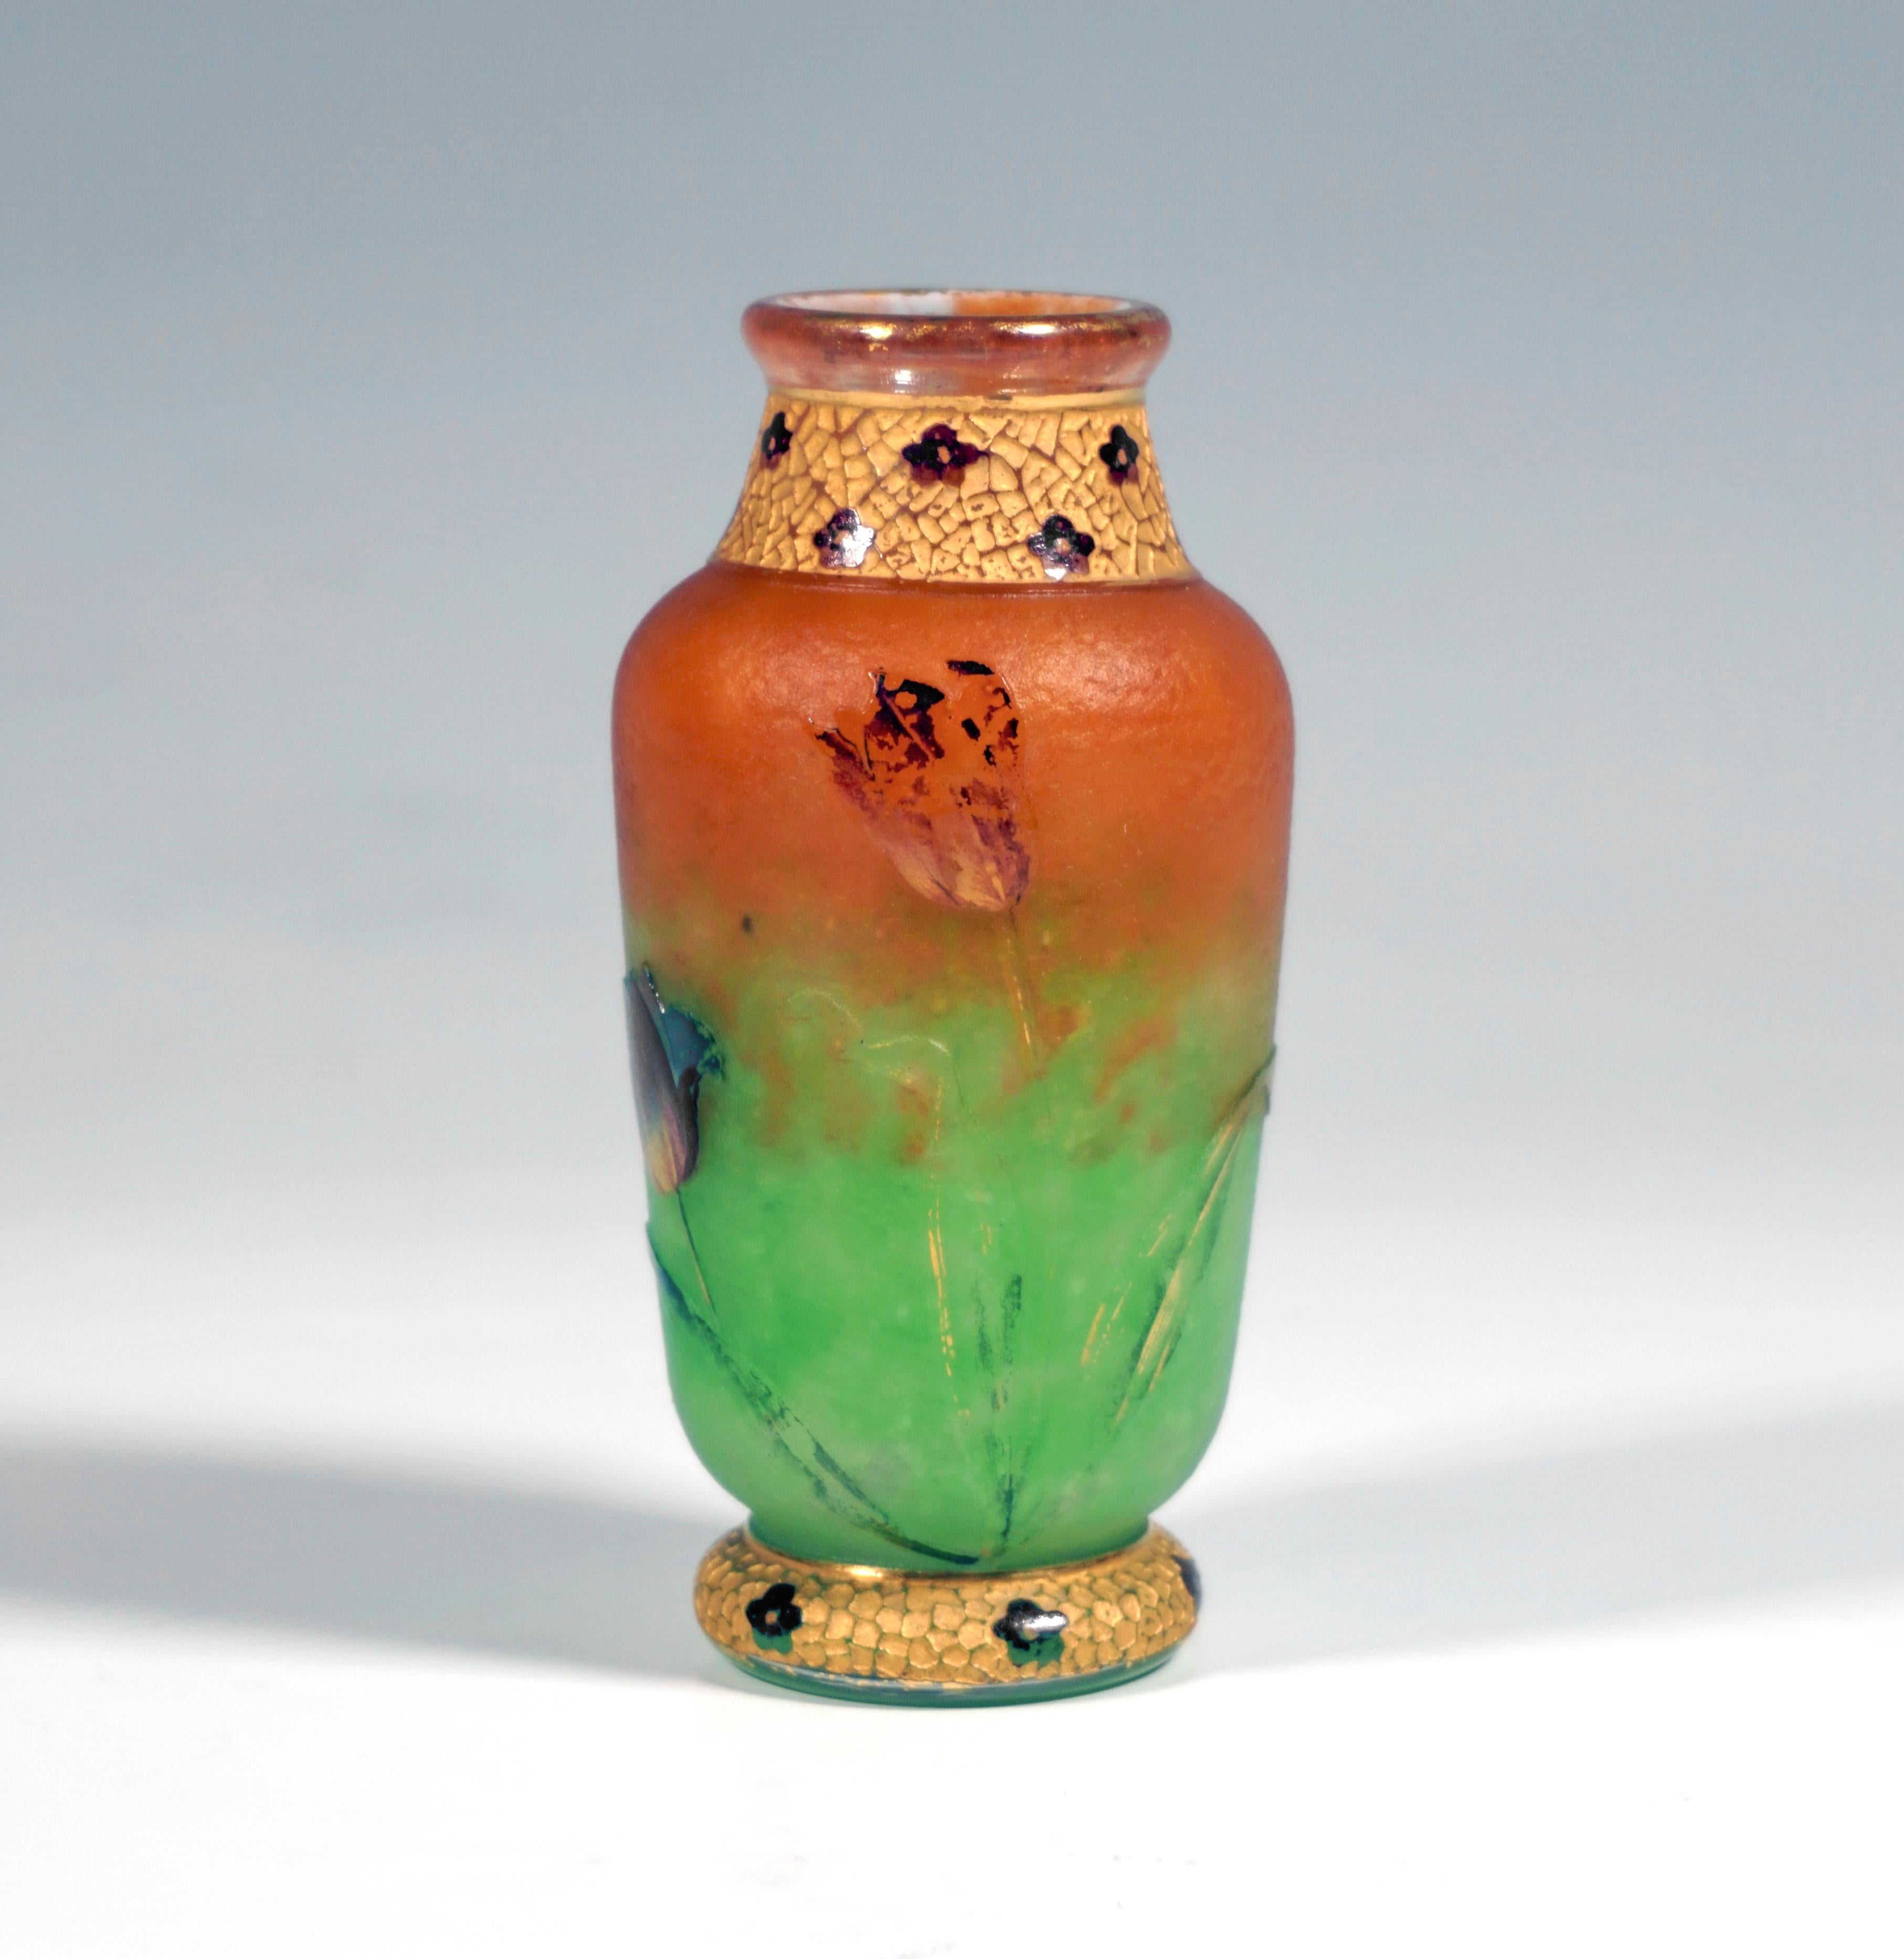 Baluster vase on a stepped base ring, bulbous body with a short neck and flared mouth rim, colorless glass with flaky green powder inclusions in the lower area and rusty brown in the upper area, with etched tulip decoration painted in colored enamel